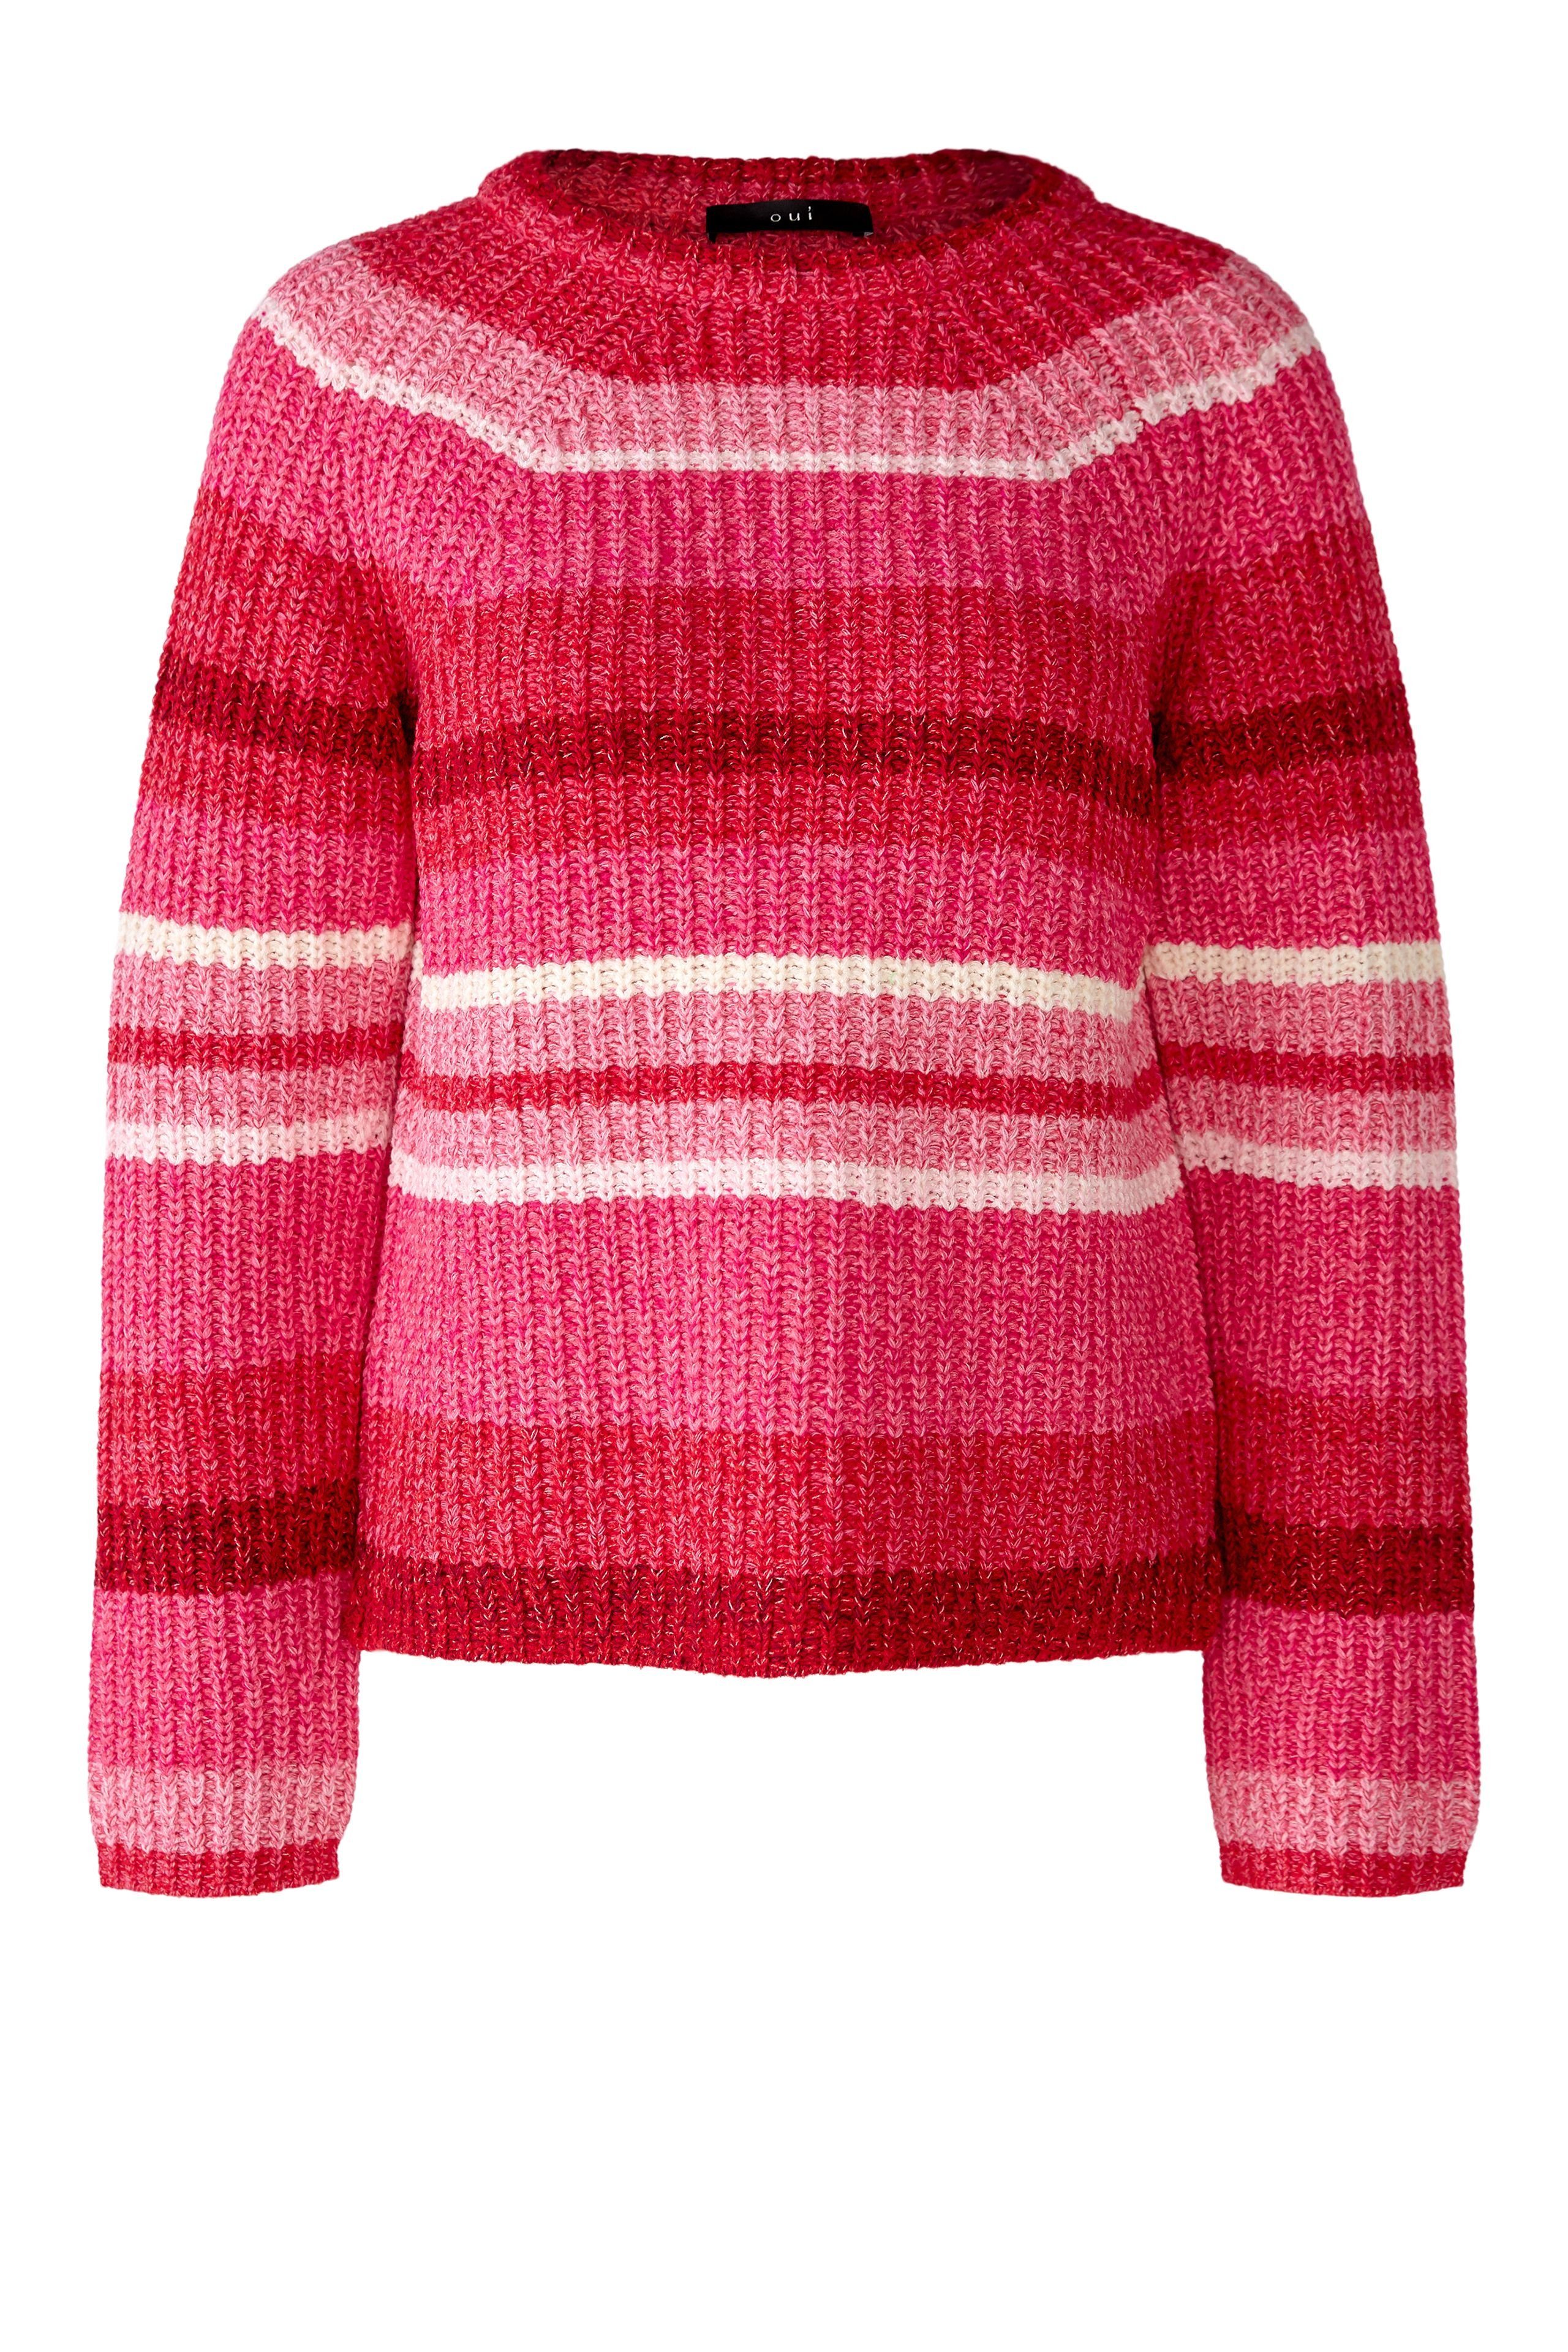 Oui Strickpullover Oui Damen Pullover Iconic Garnmix - pink red (1-tlg)